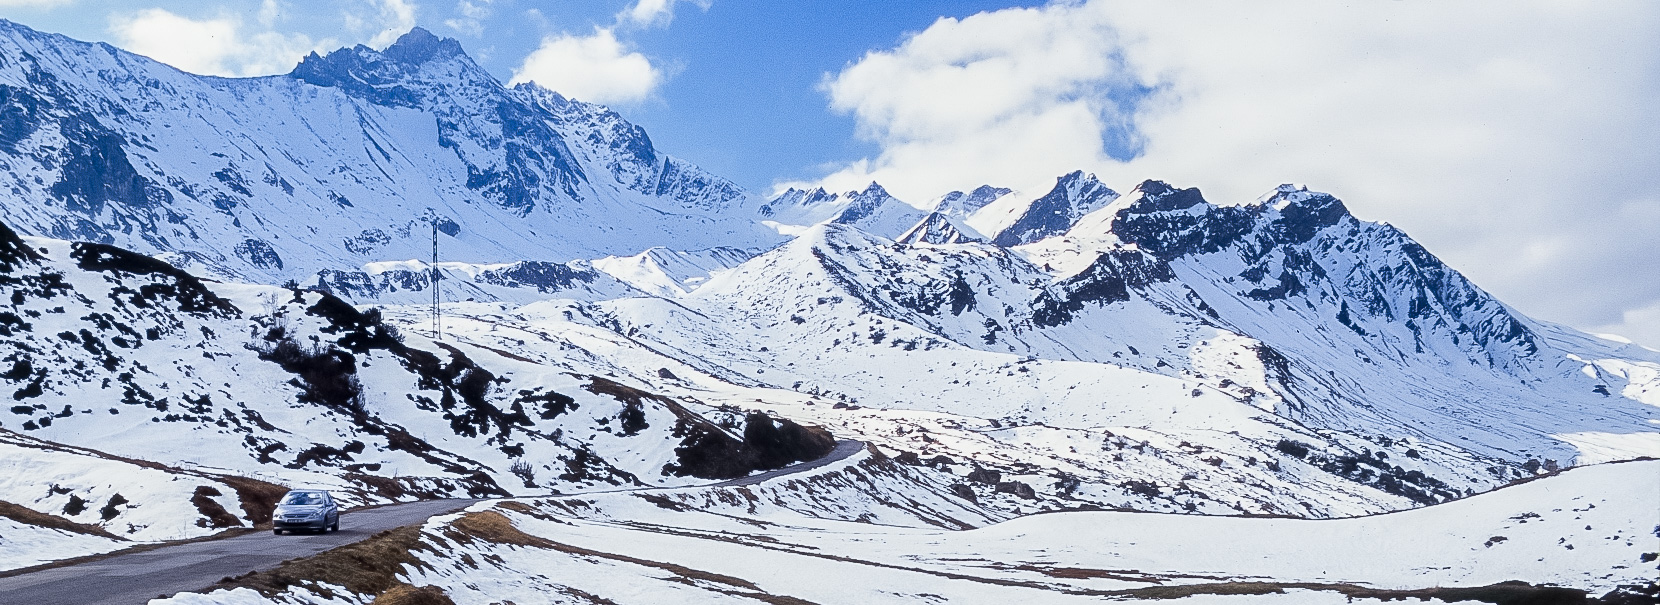 Wide view of Route des Grandes Alpes among snow-covered mountains